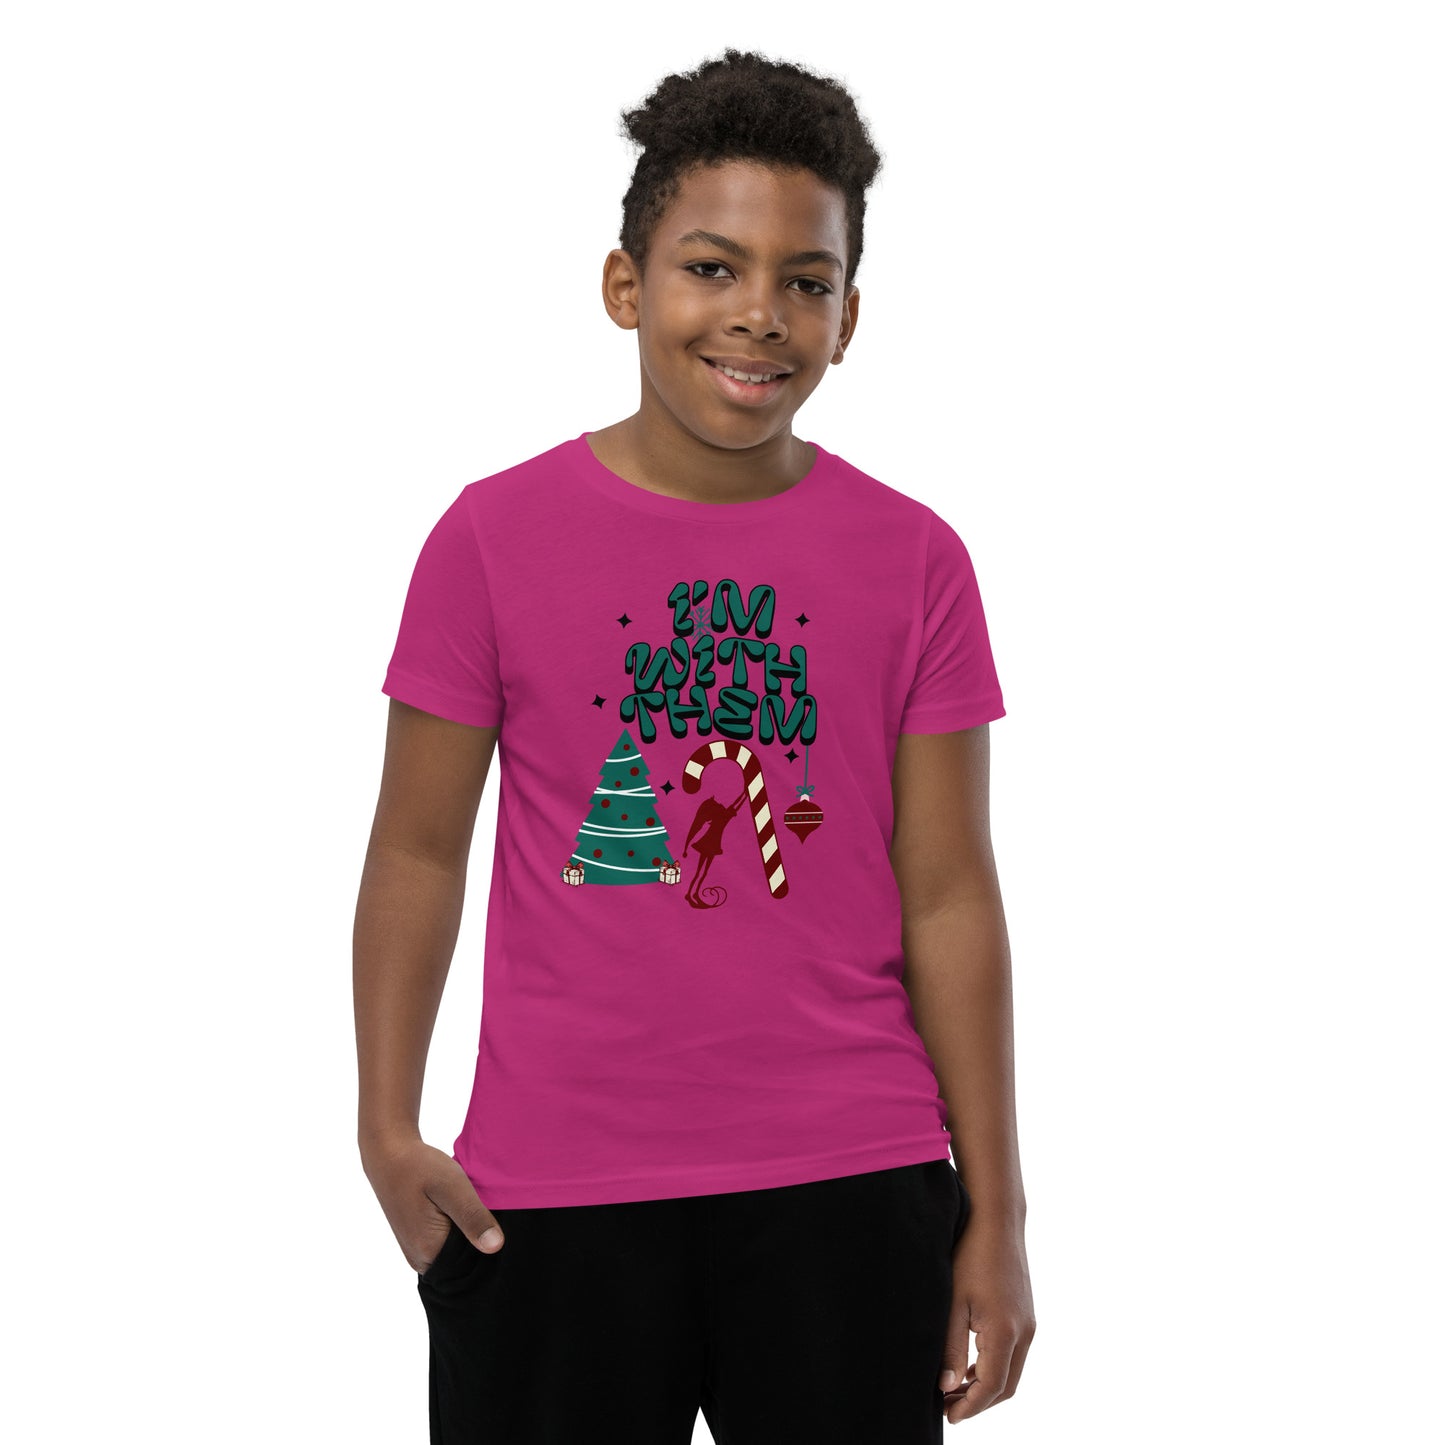 Xmas Youth T-Shirt- IM WITH THEM!